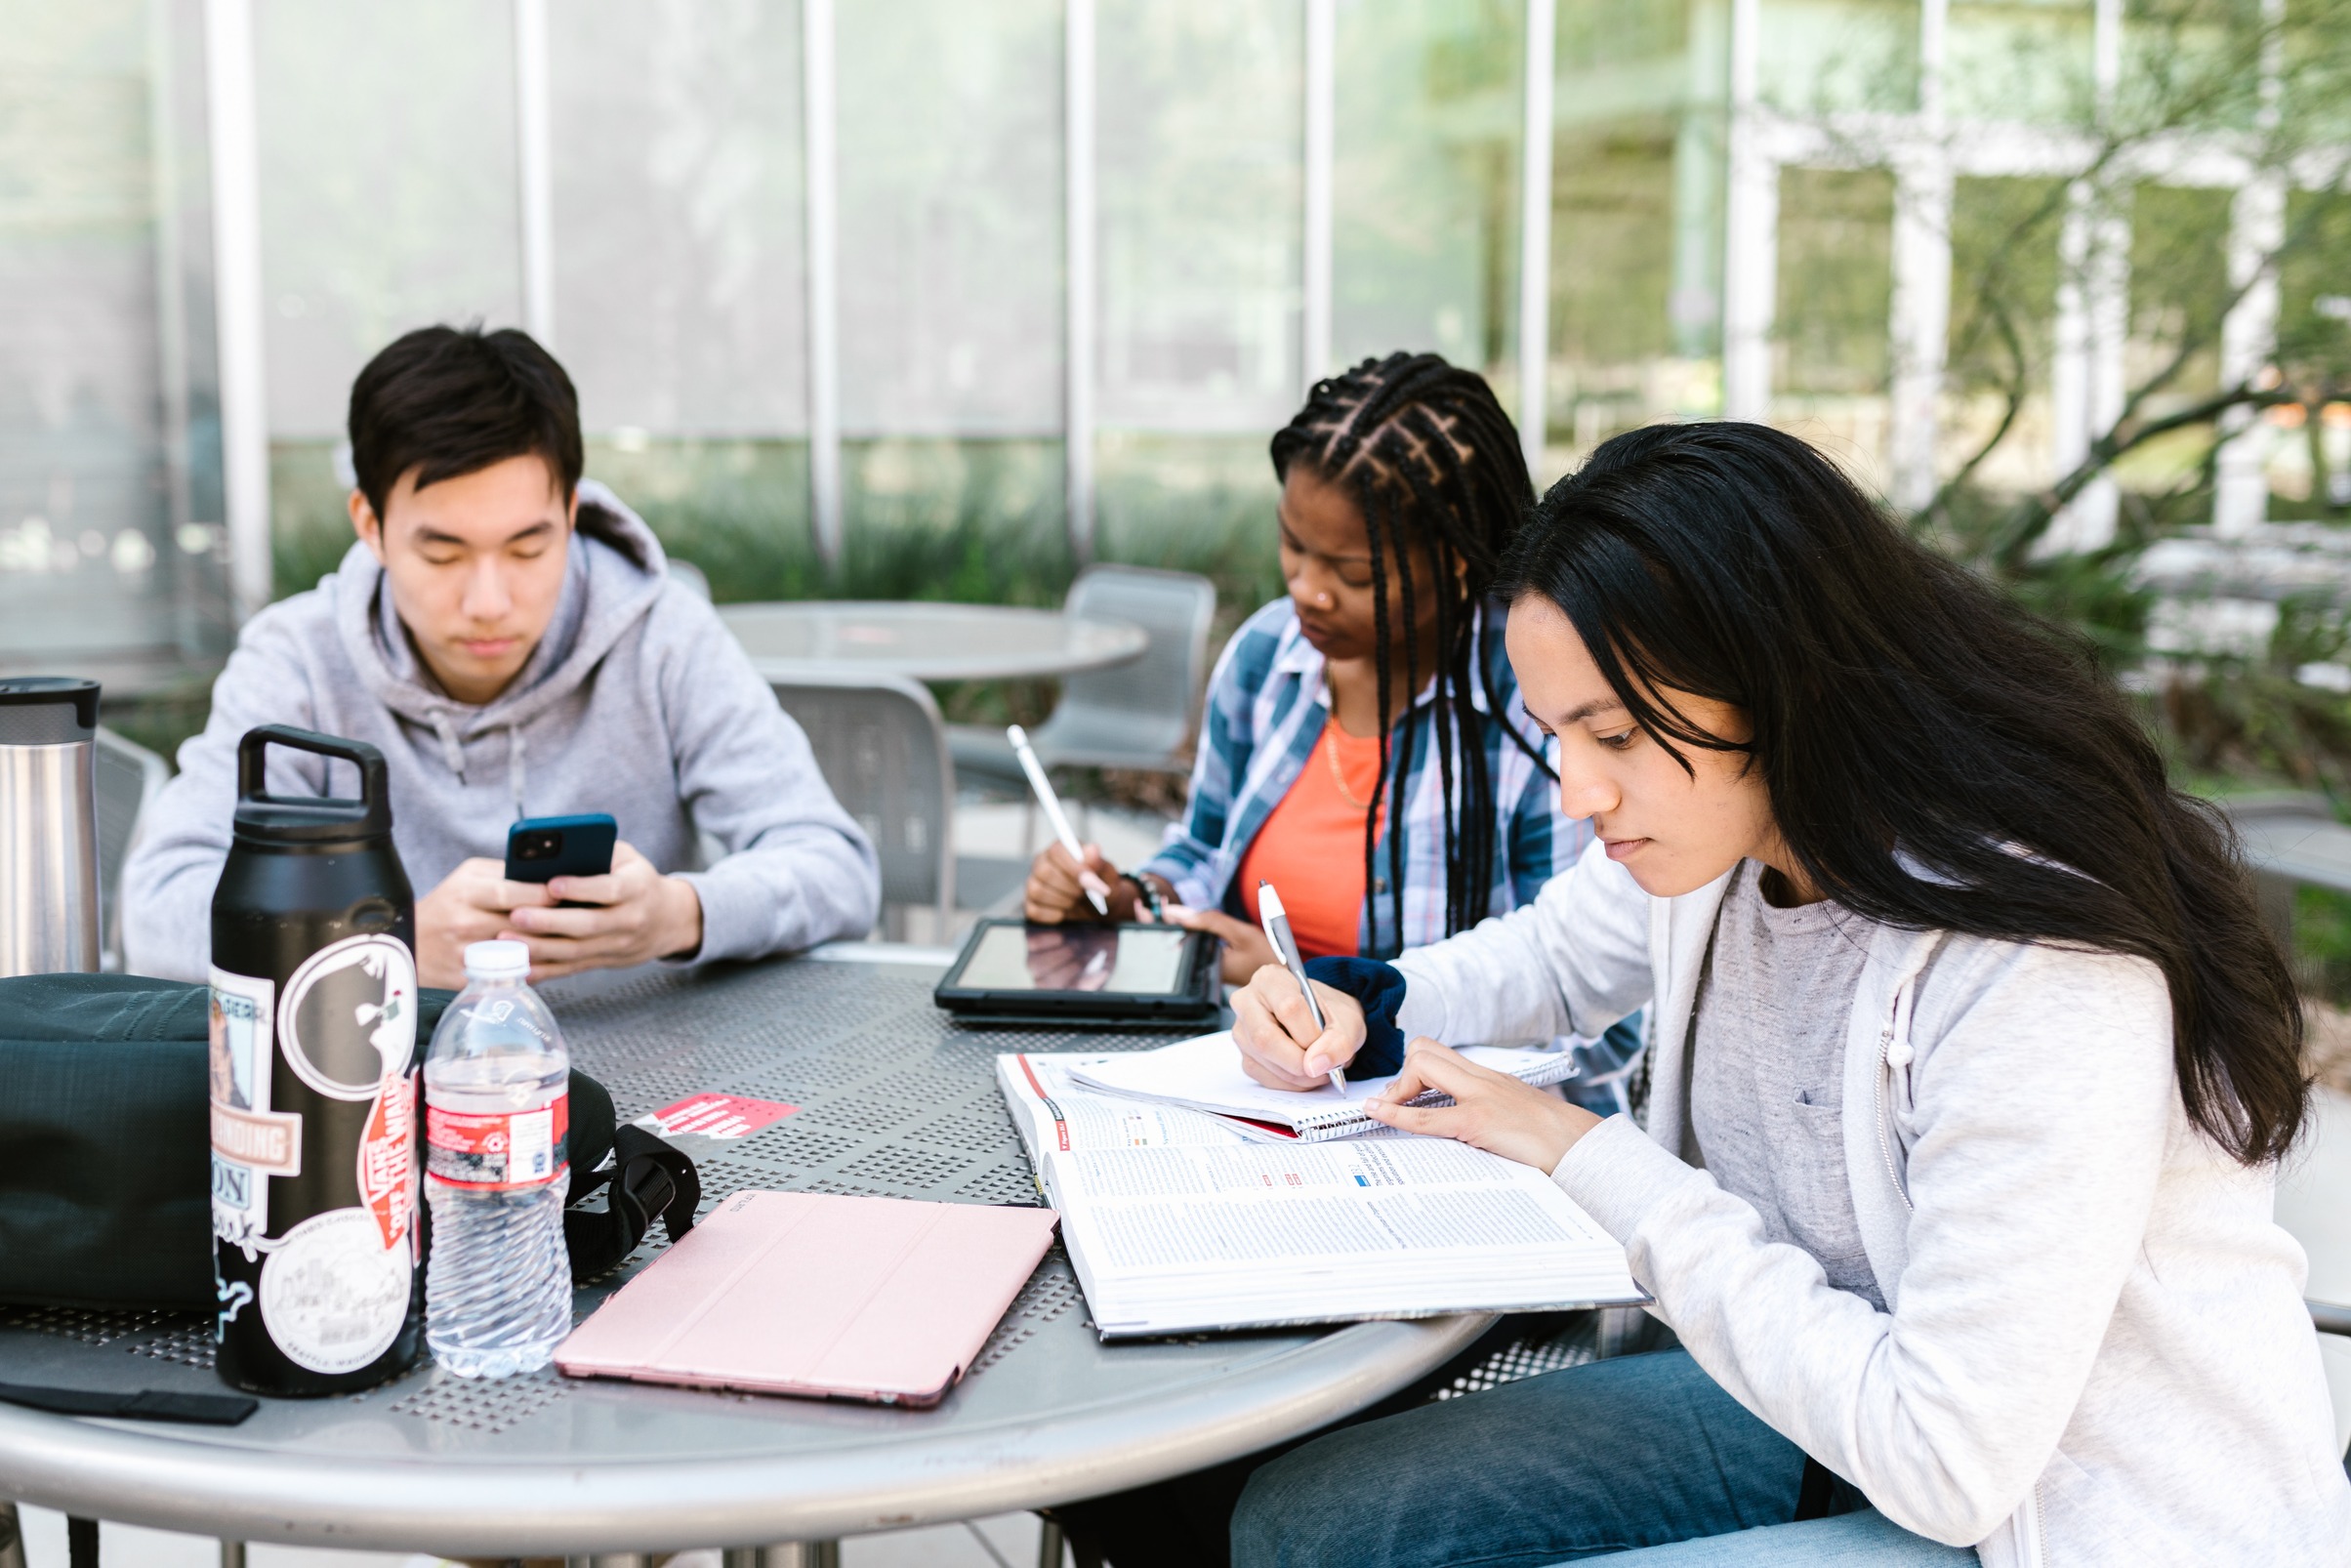 three post-secondary students sitting at a round table outside and studying.